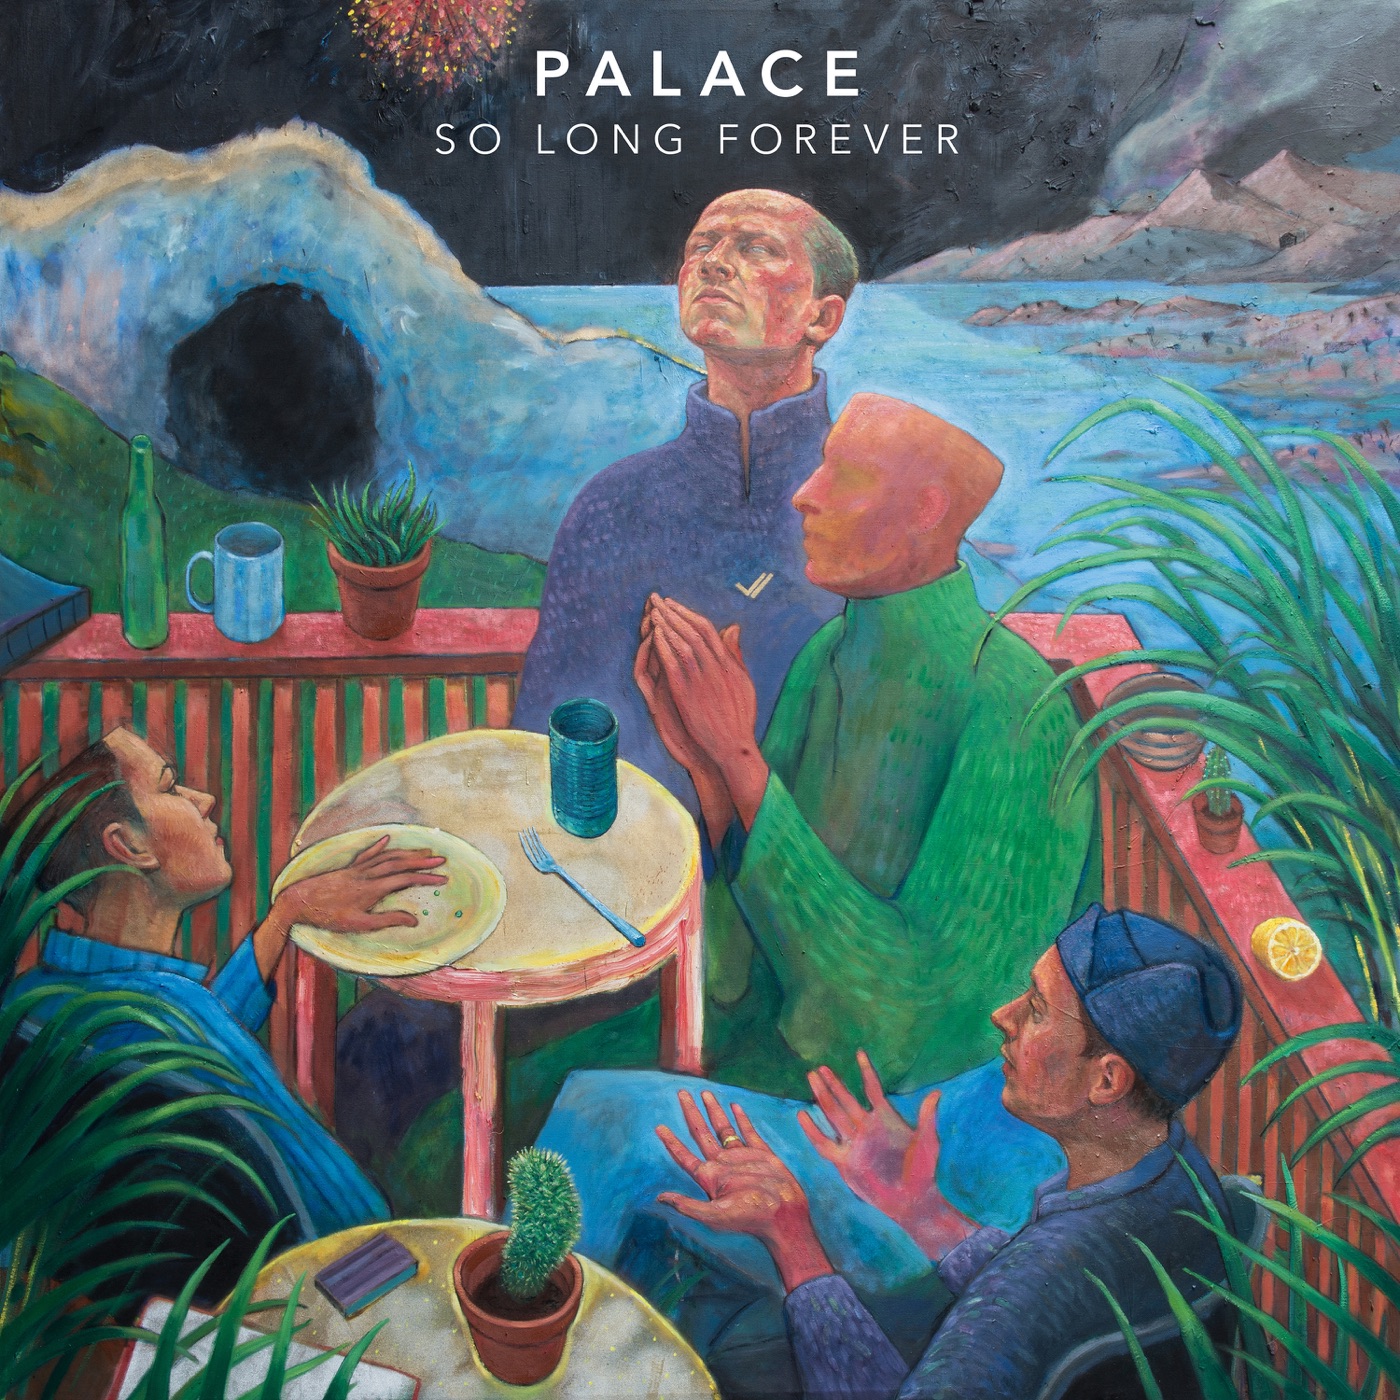 So Long Forever by Palace